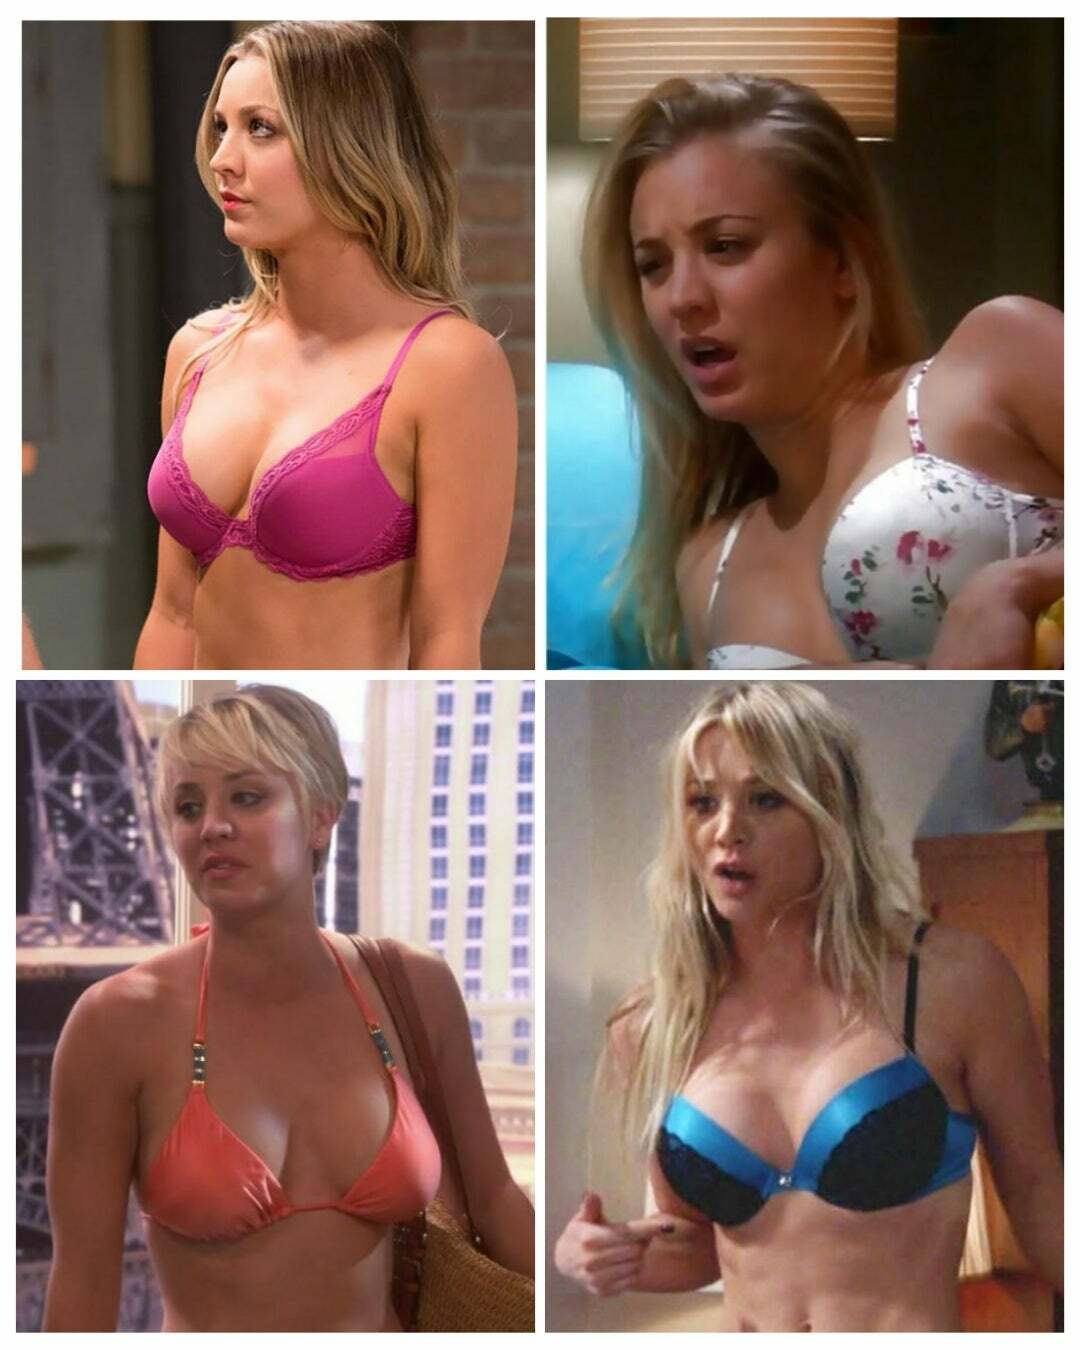 I love it when Penny Kaley Cuoco is running around